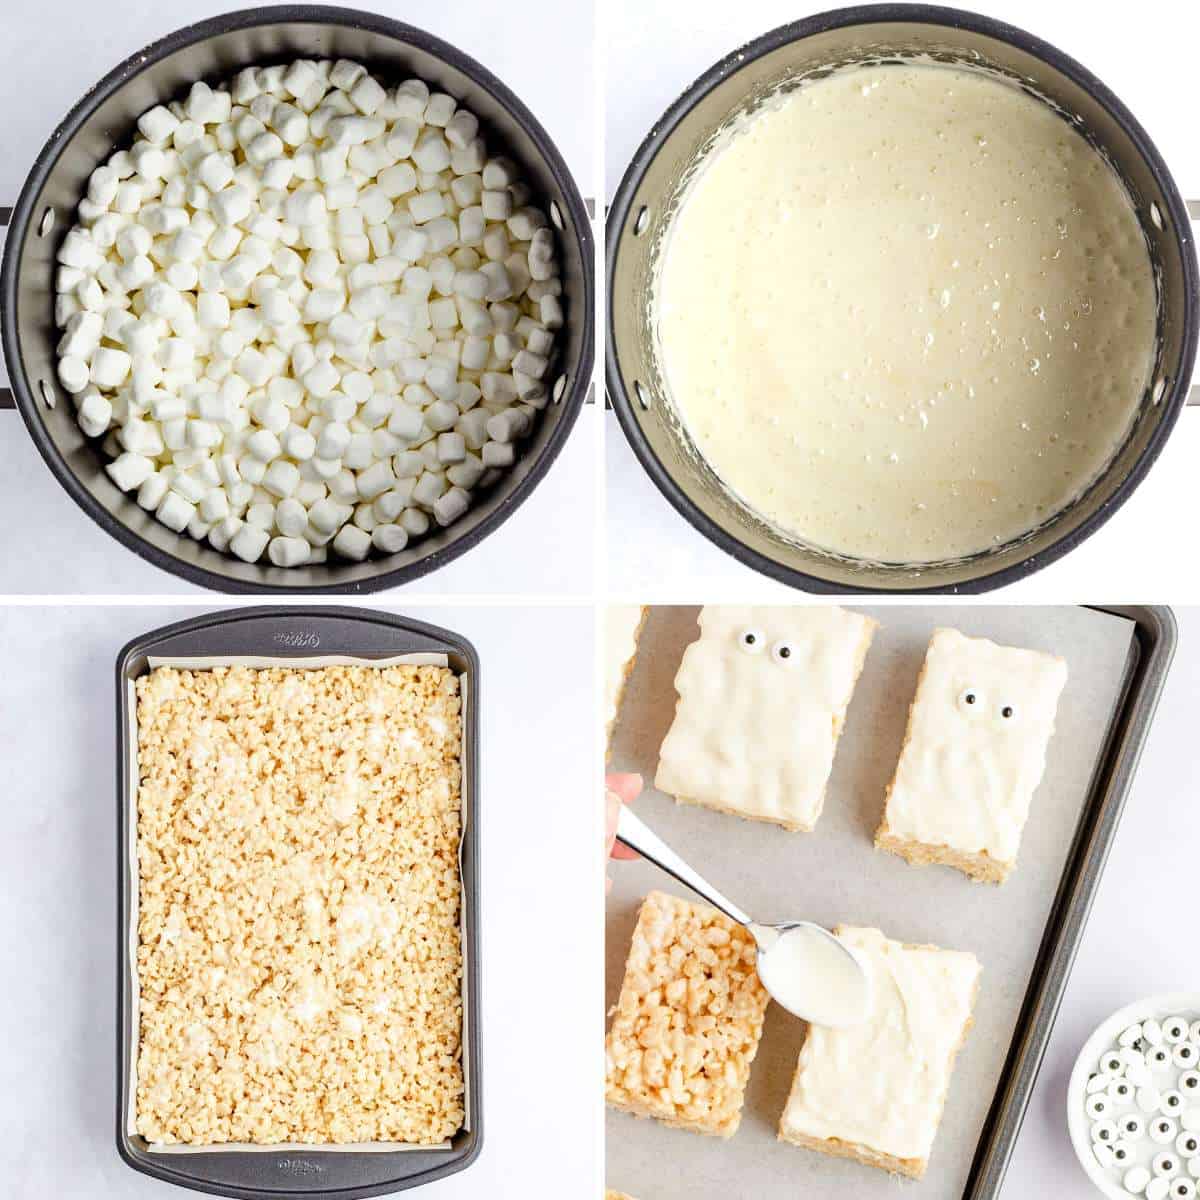 Collage of four images showing how to make Rice Krispie treats and decorate them to look like mummies